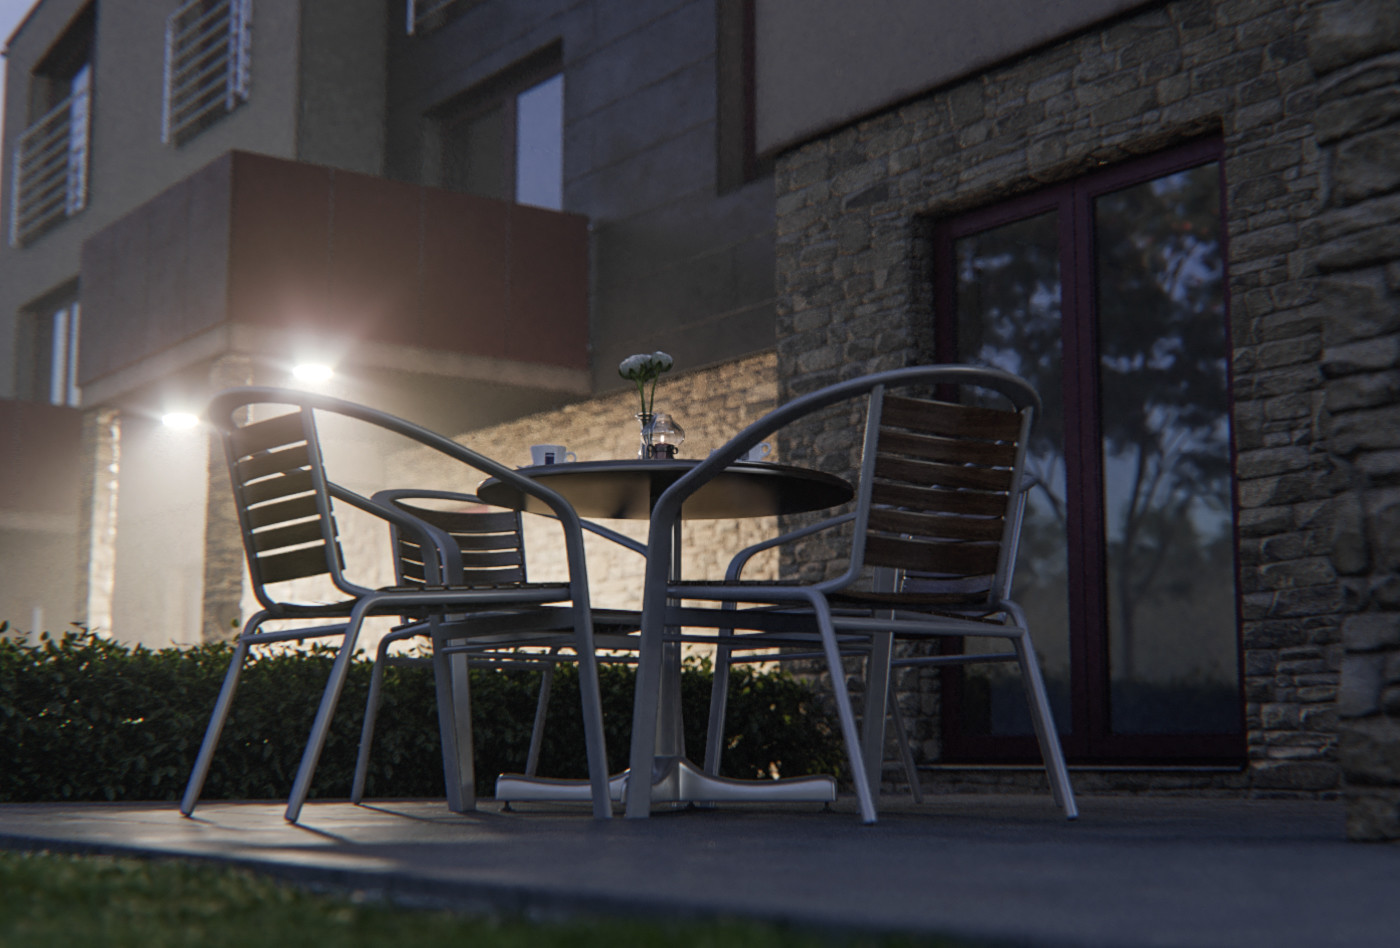 Quick test with fog in V-Ray Next SP1 beta.